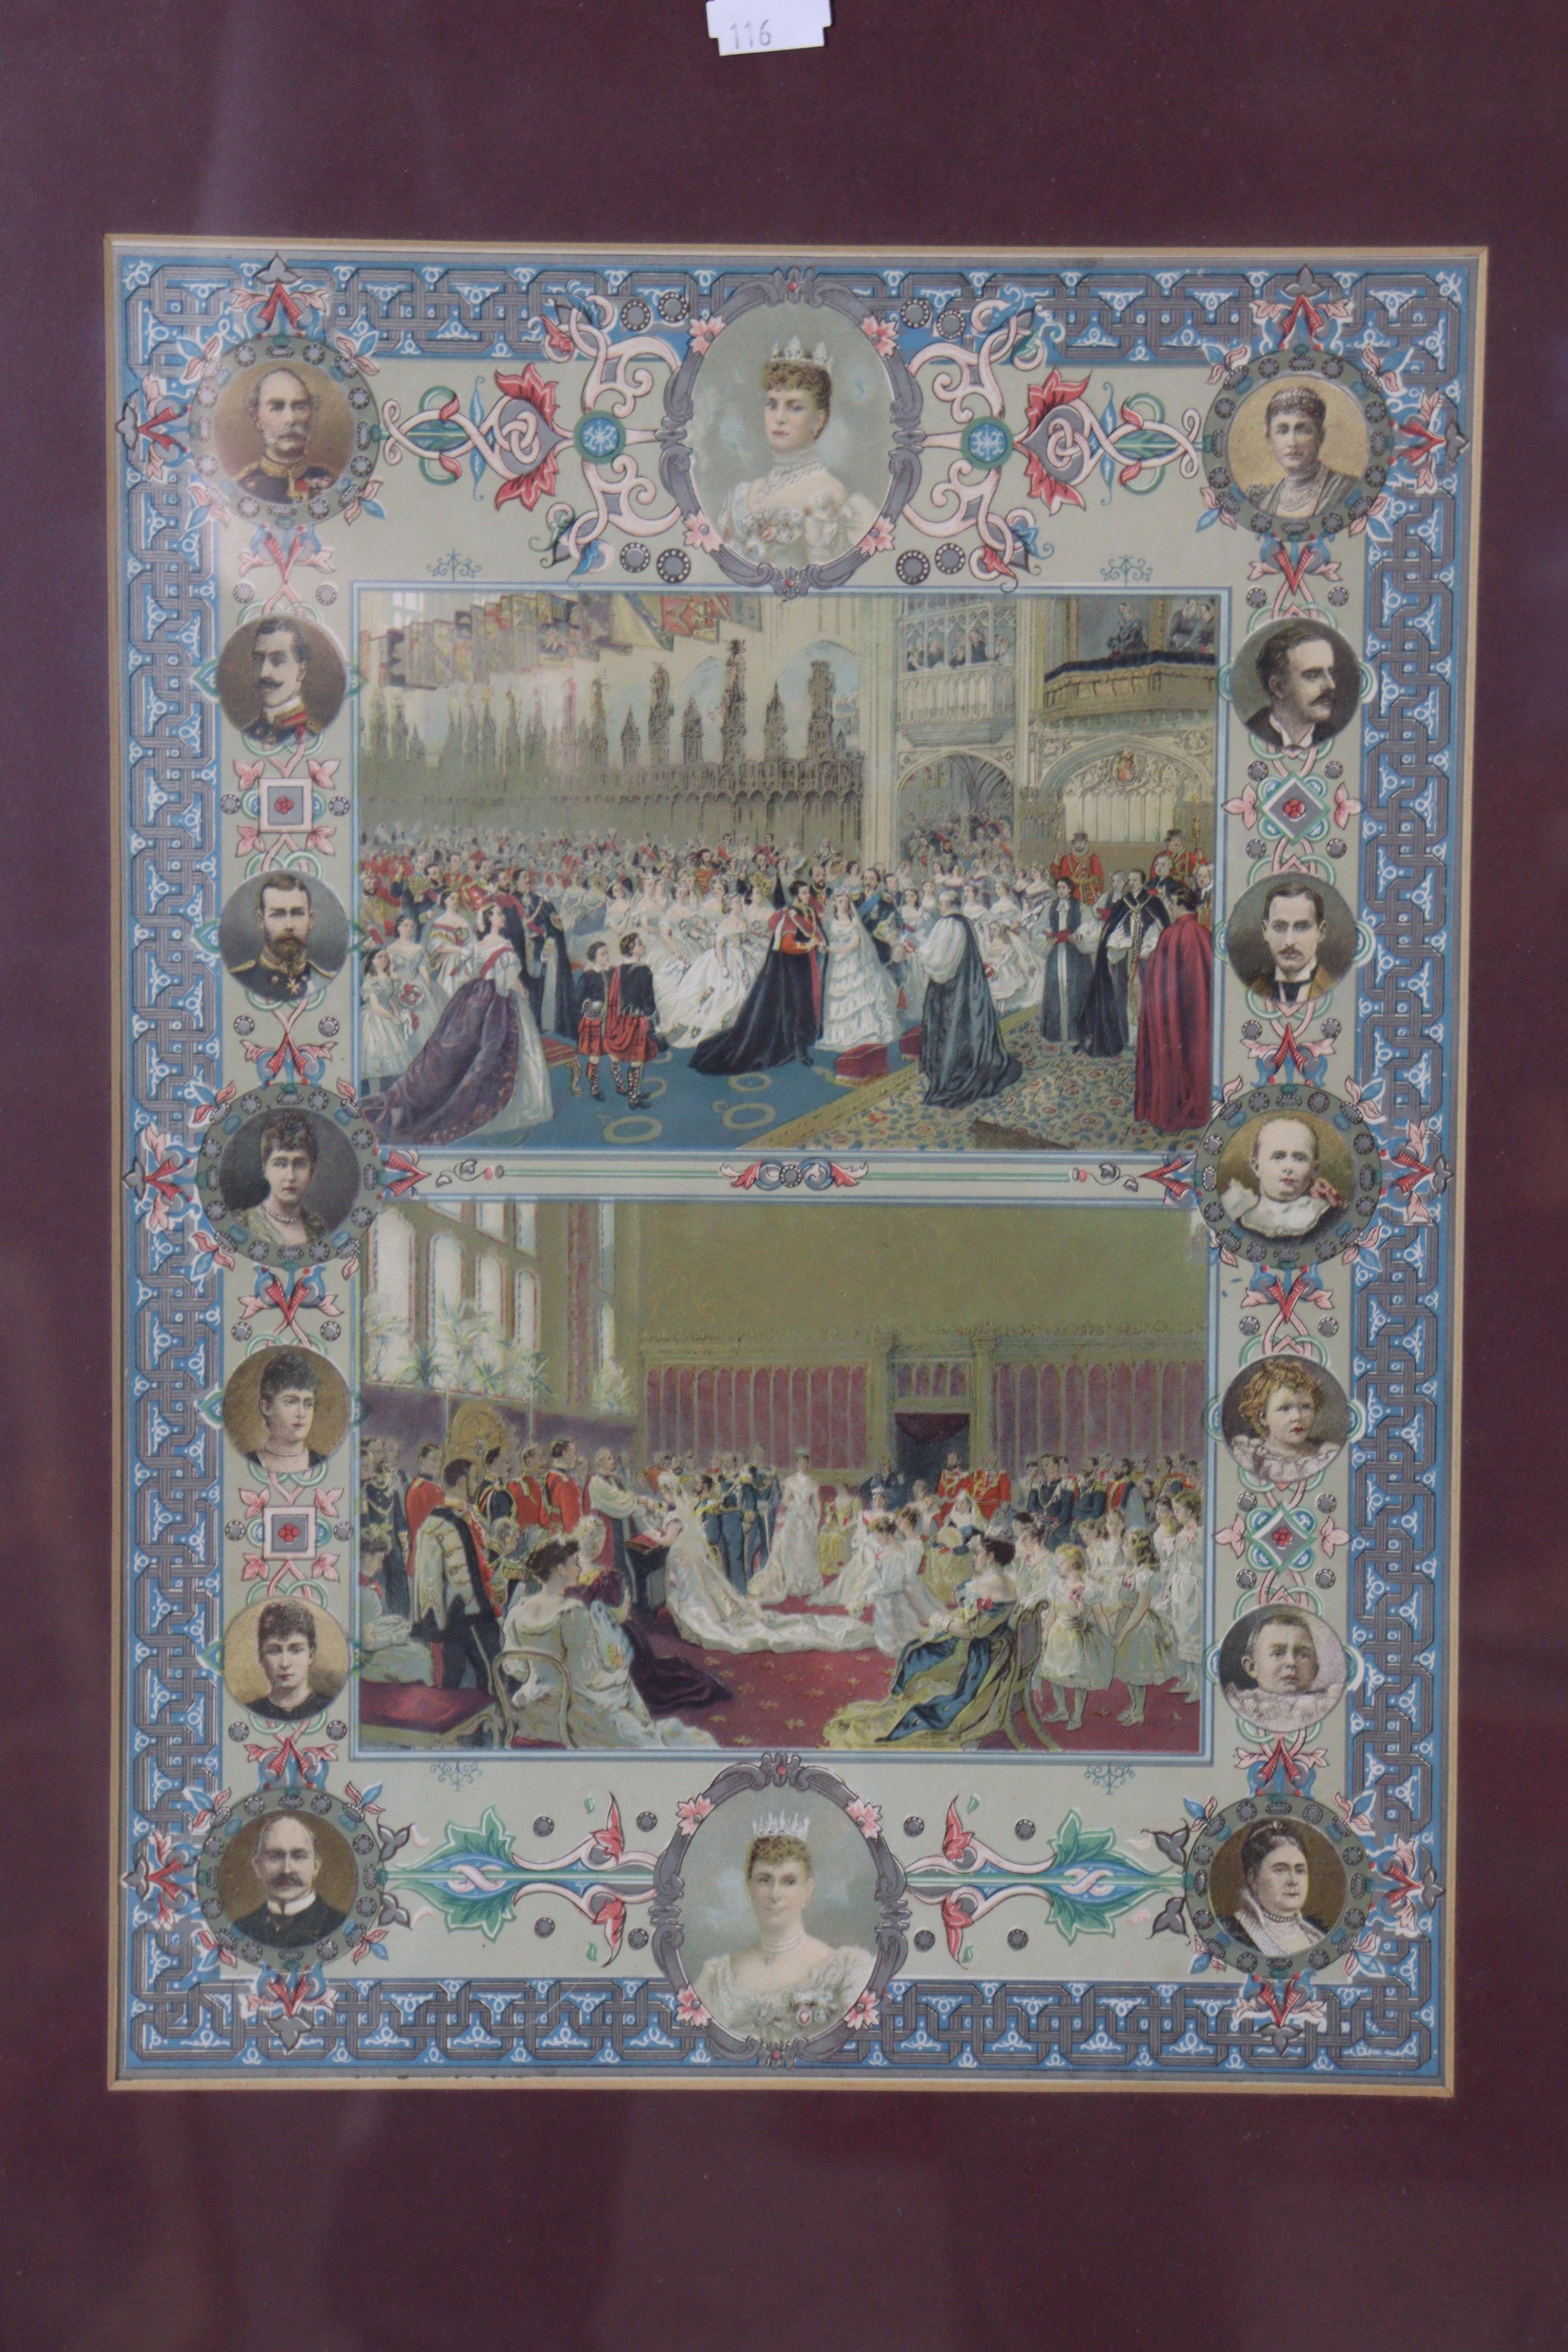 A Vintage Illustrated News Chromolithograph front cover depicting Queen Victoria’s diamond jubilee - Image 4 of 4